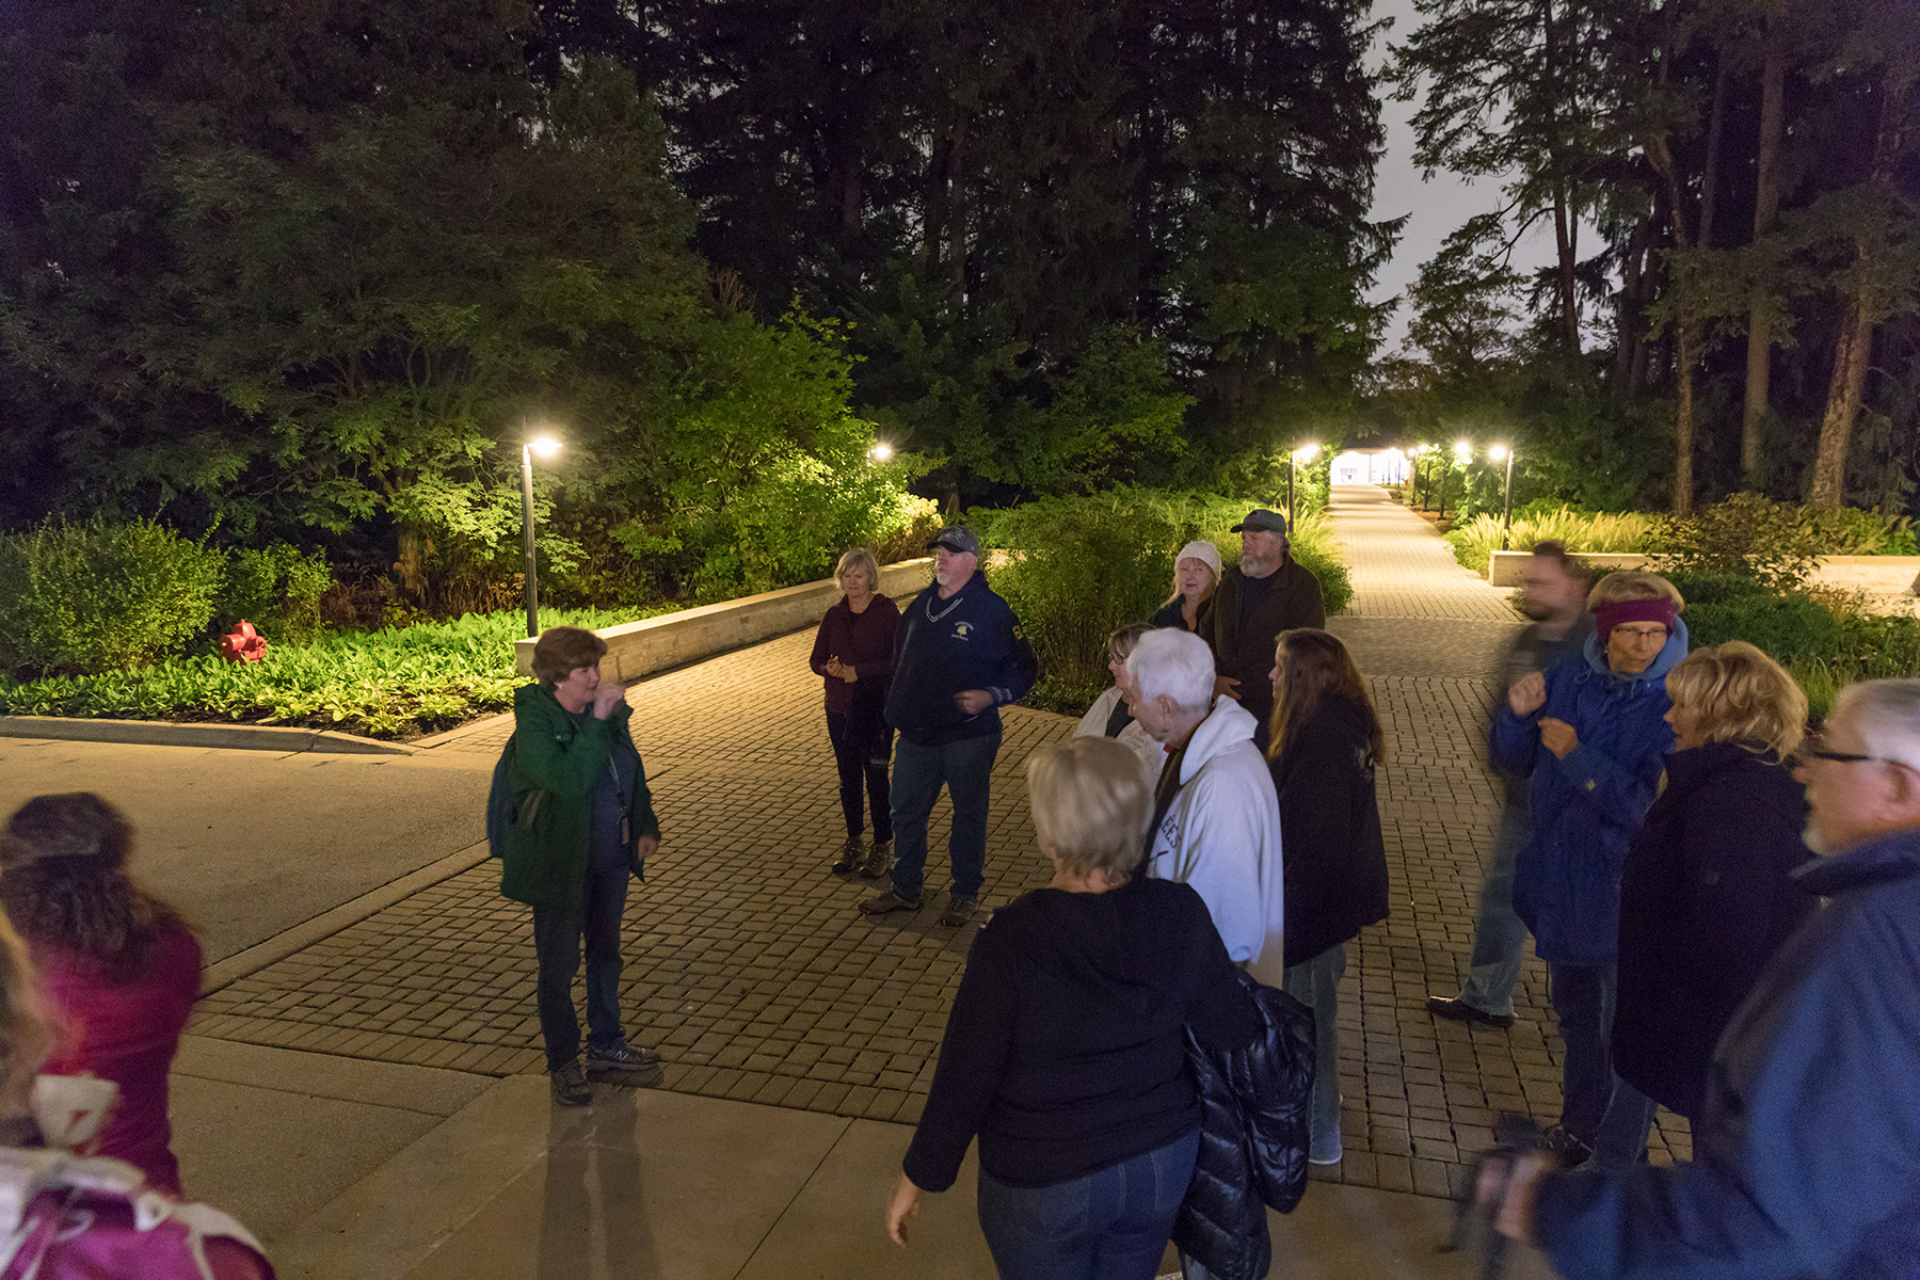 A group getting ready to take a hike at night at the Arboretum